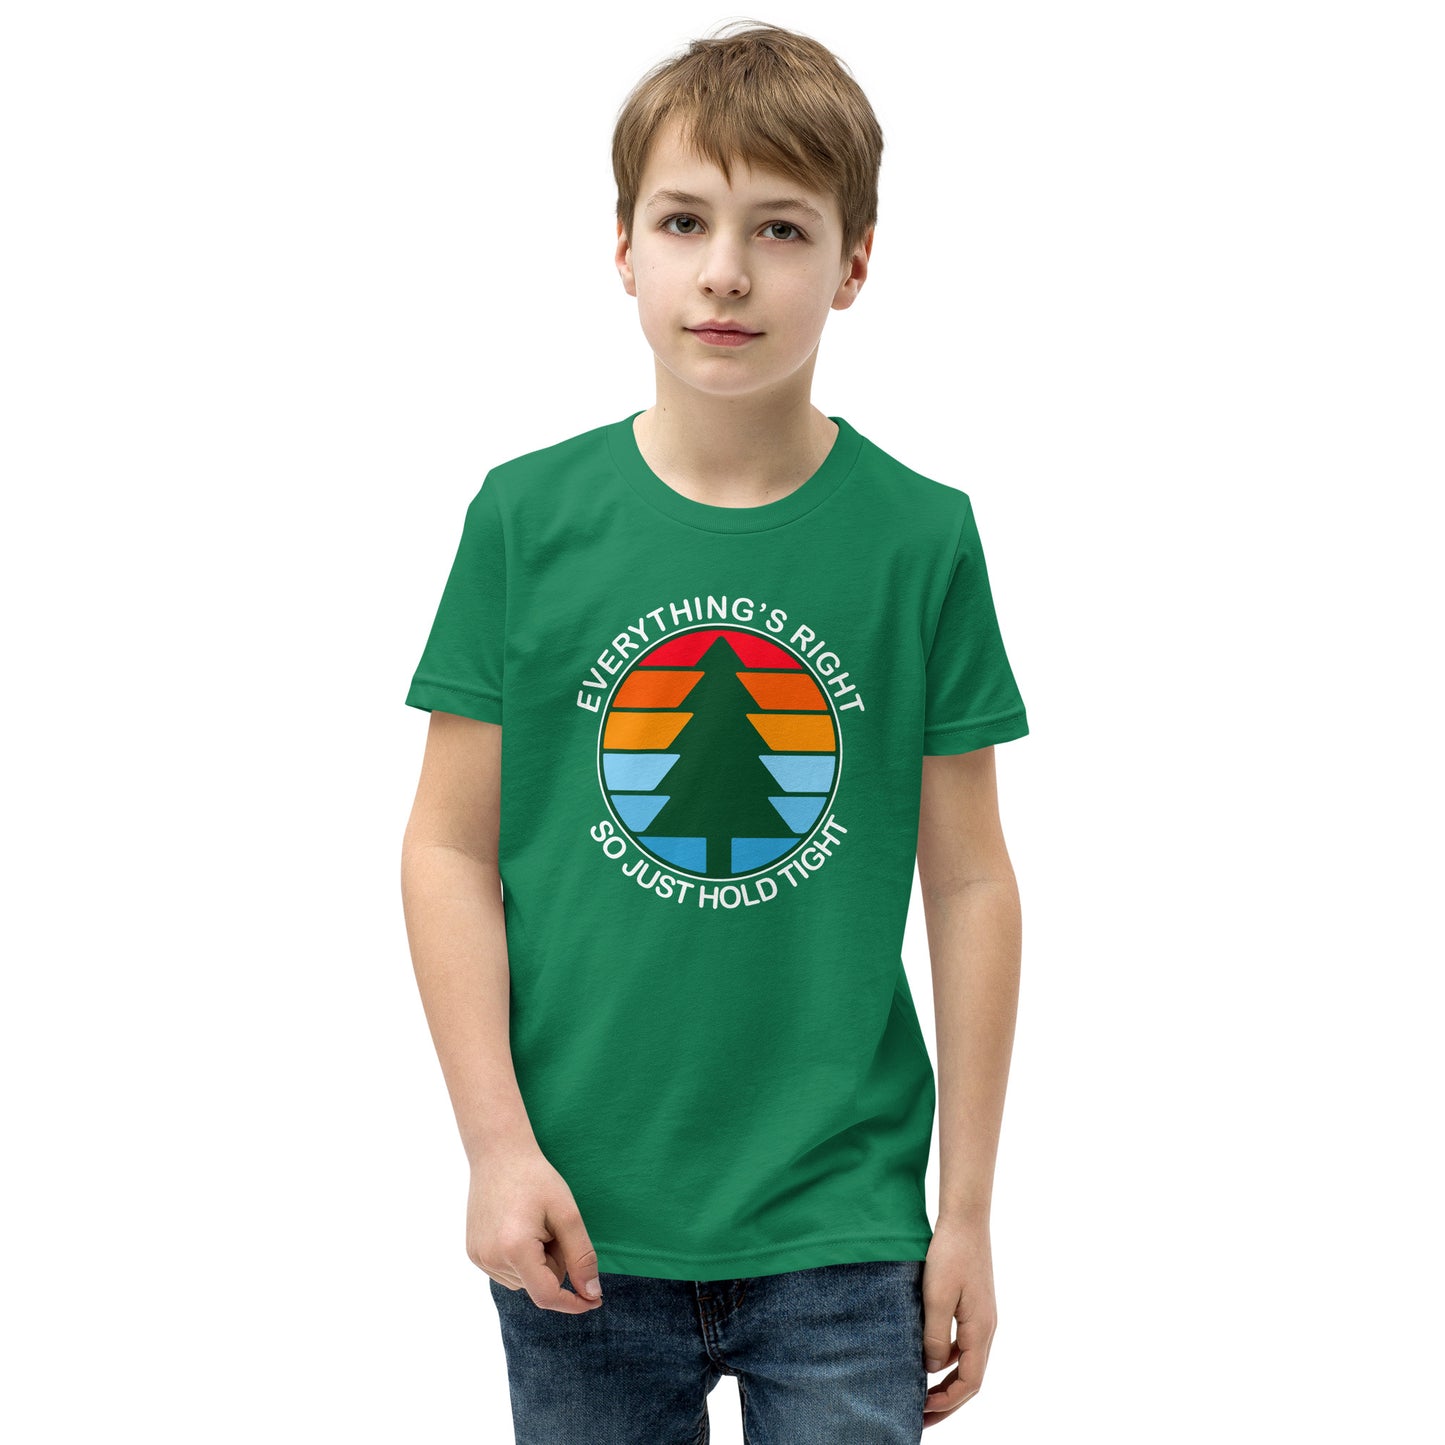 Everythings Right Youth Short Sleeve T-Shirt